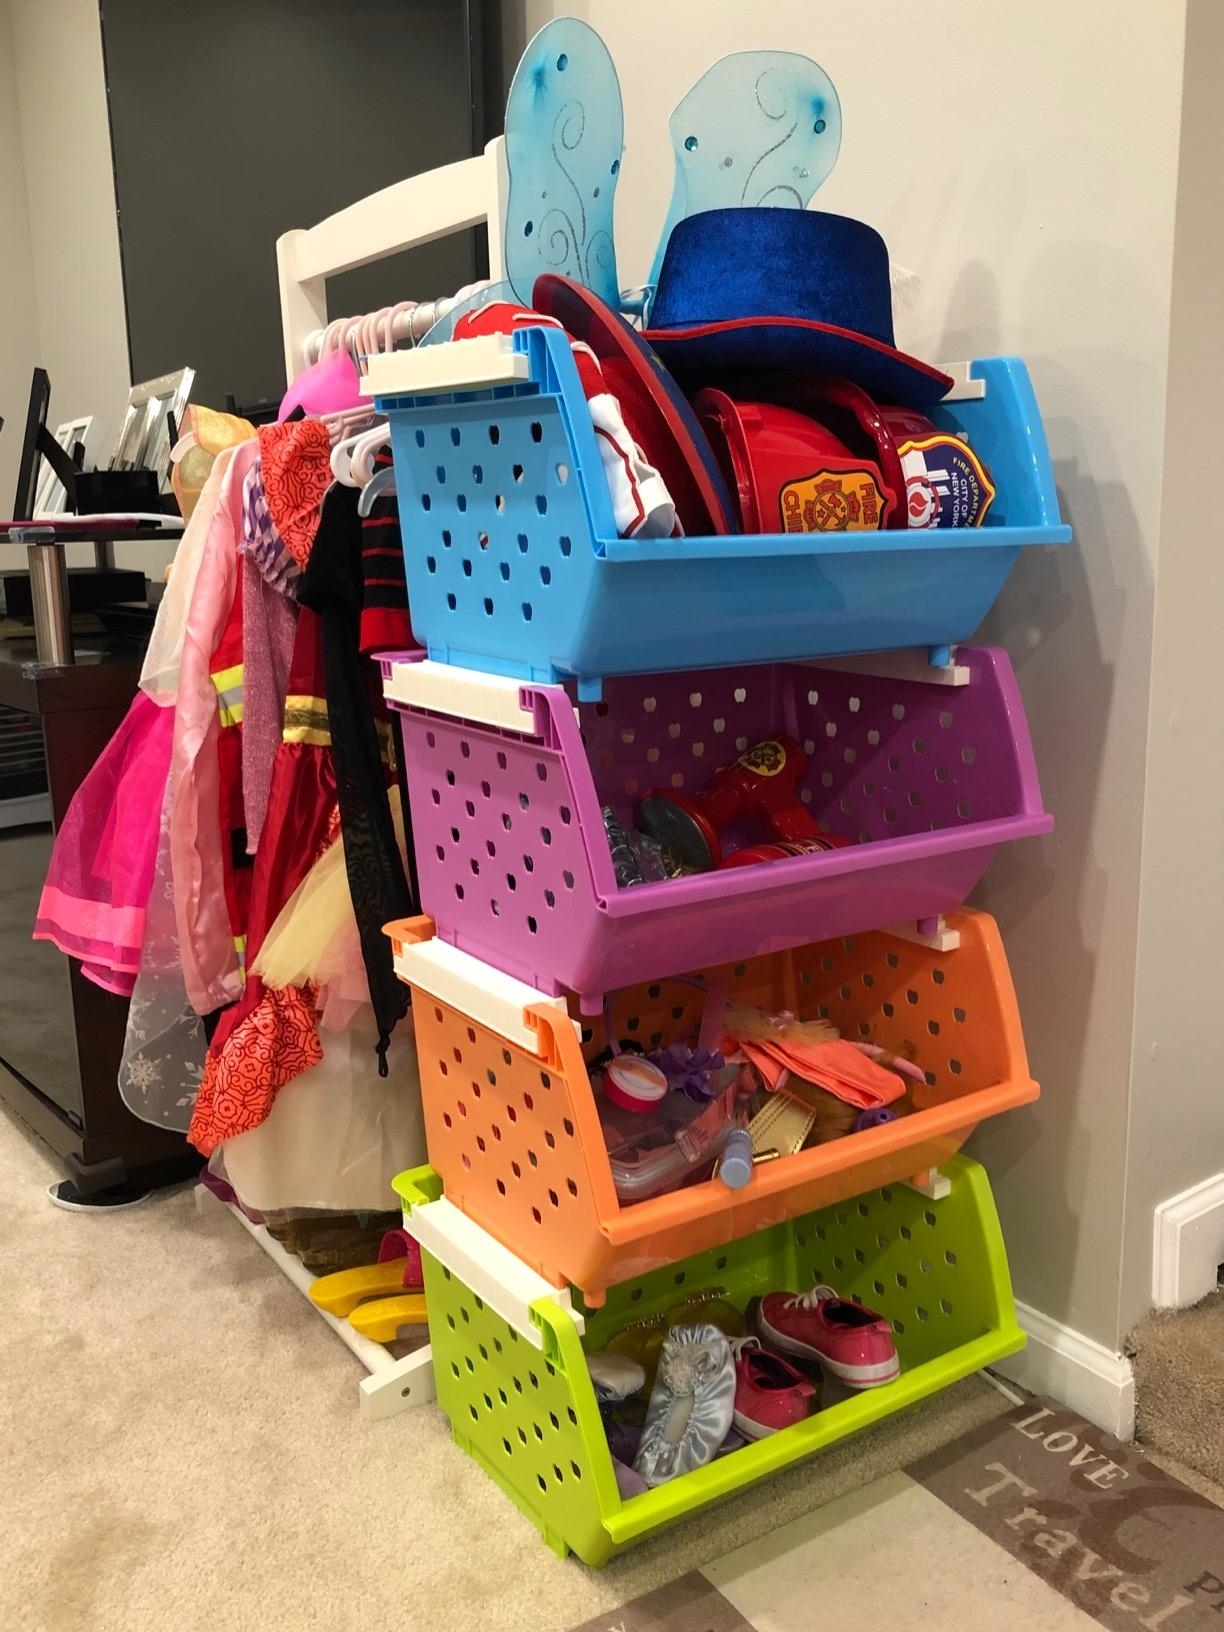 Stacked toy bins with various children&#x27;s dress-up clothes and accessories